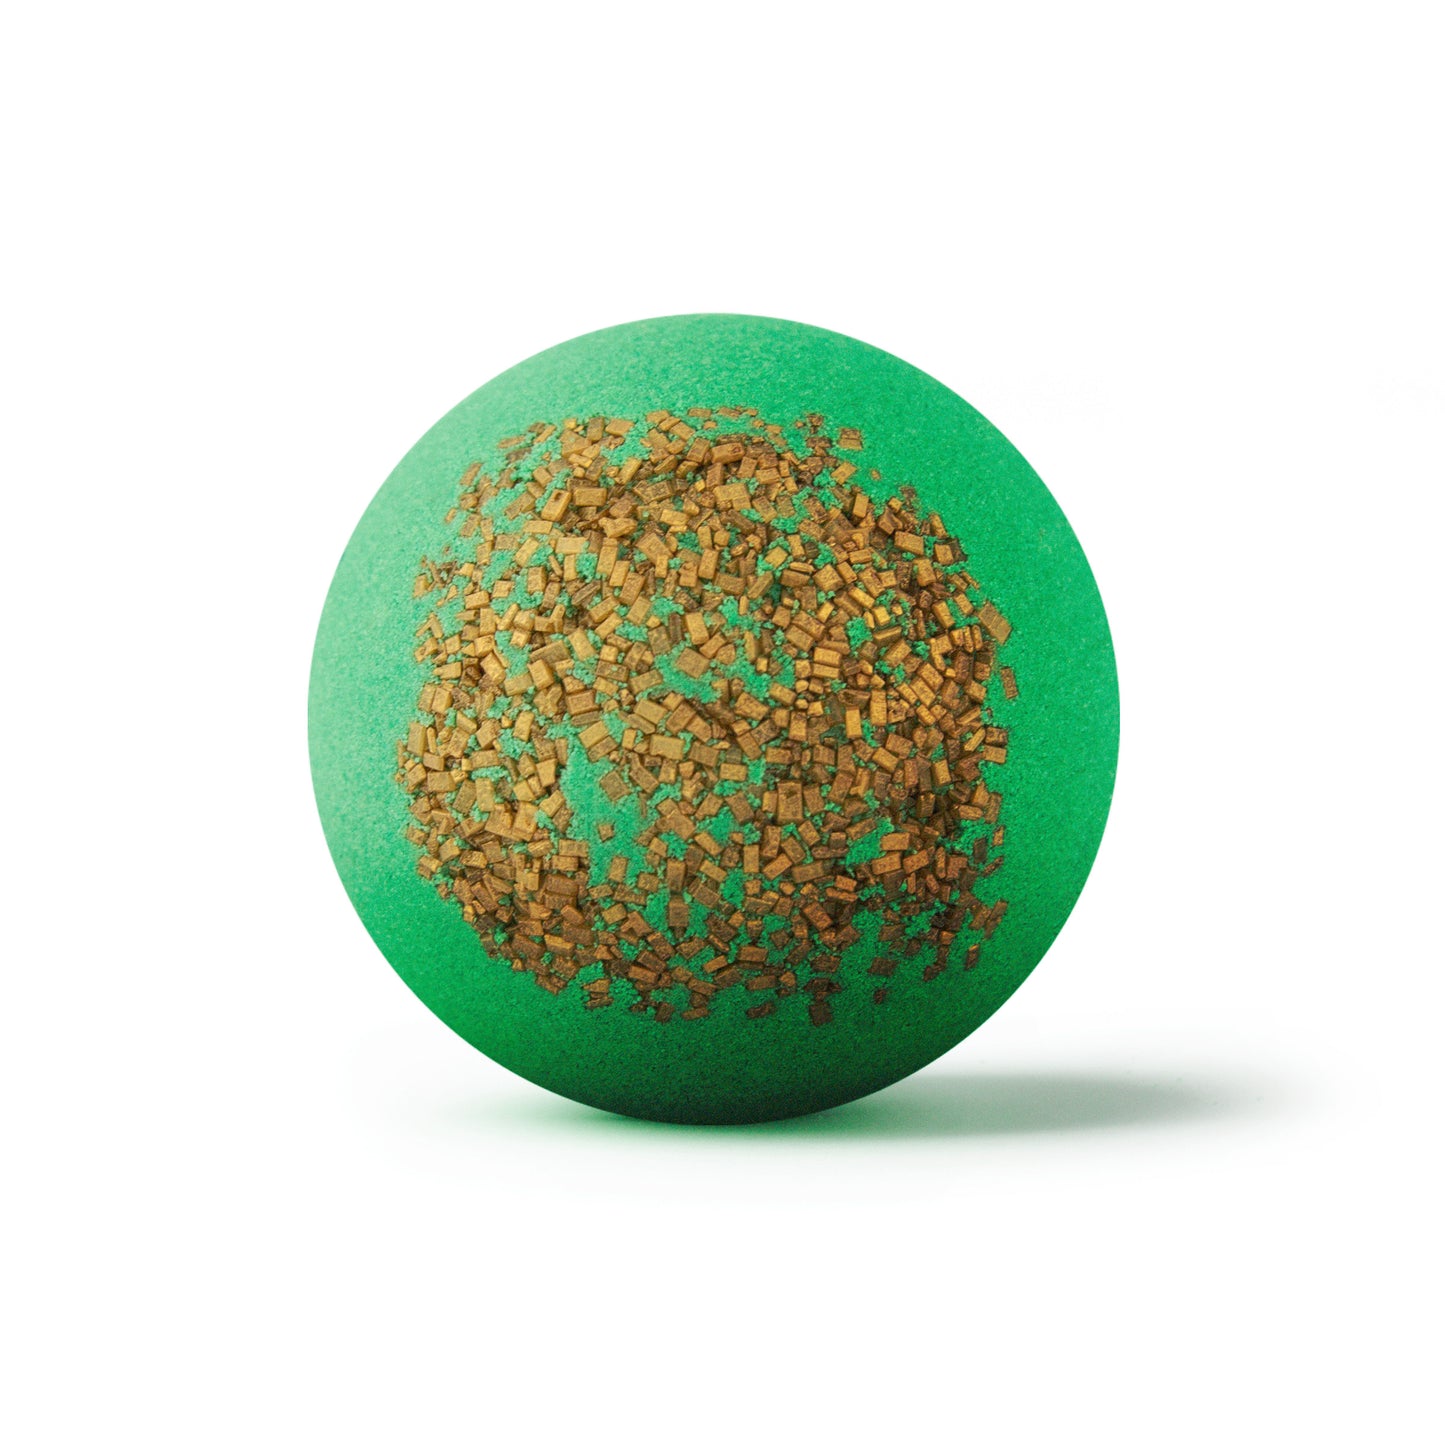 a green bath bomb with golden sprinkles